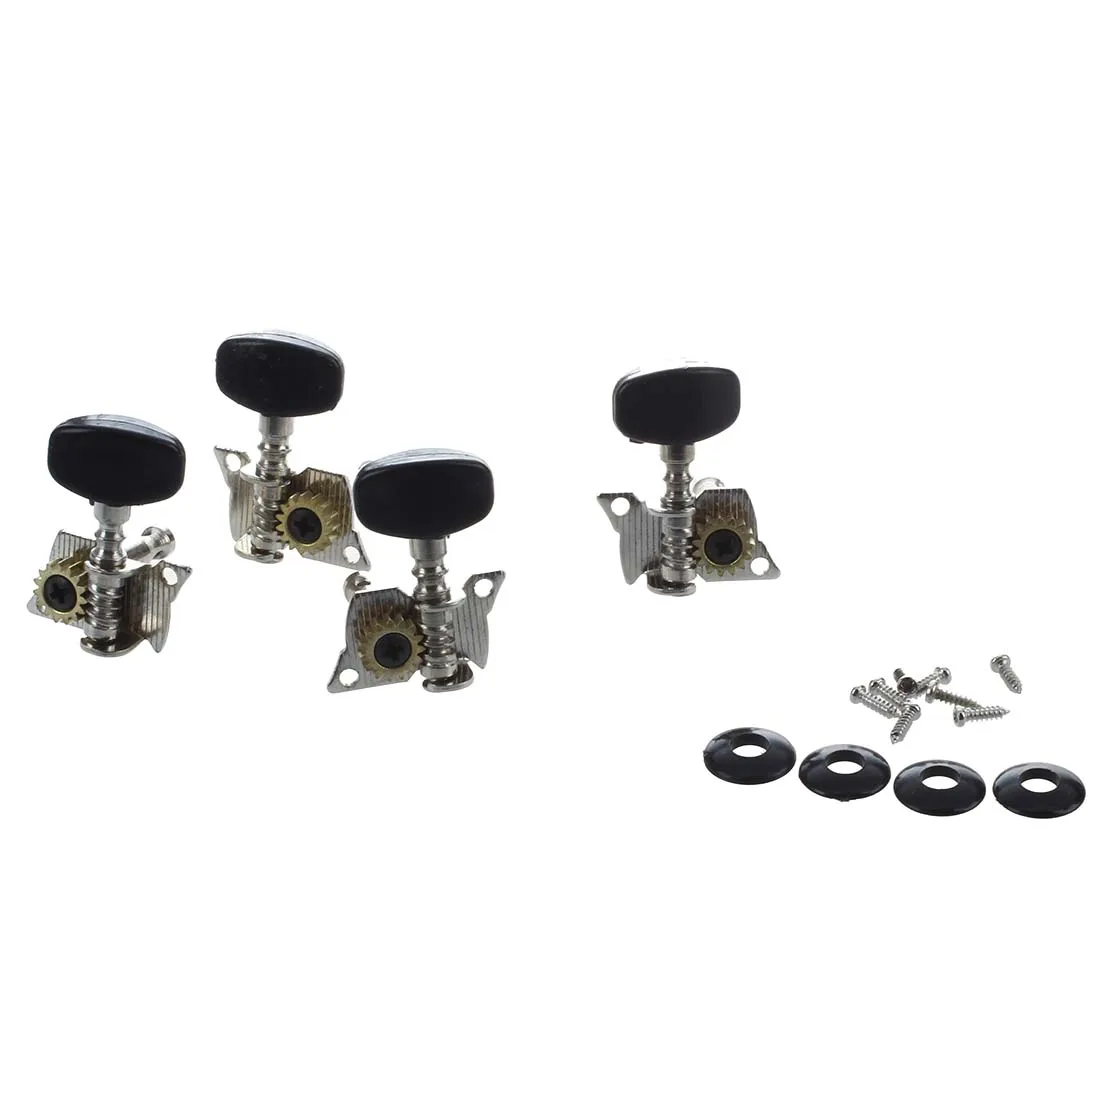 

4Pcs Ukulele Guitar and Small 4 String Guitar Tuning Pegs Machine Heads 2R and 2L, Mounting Screws Included--Silver and Black